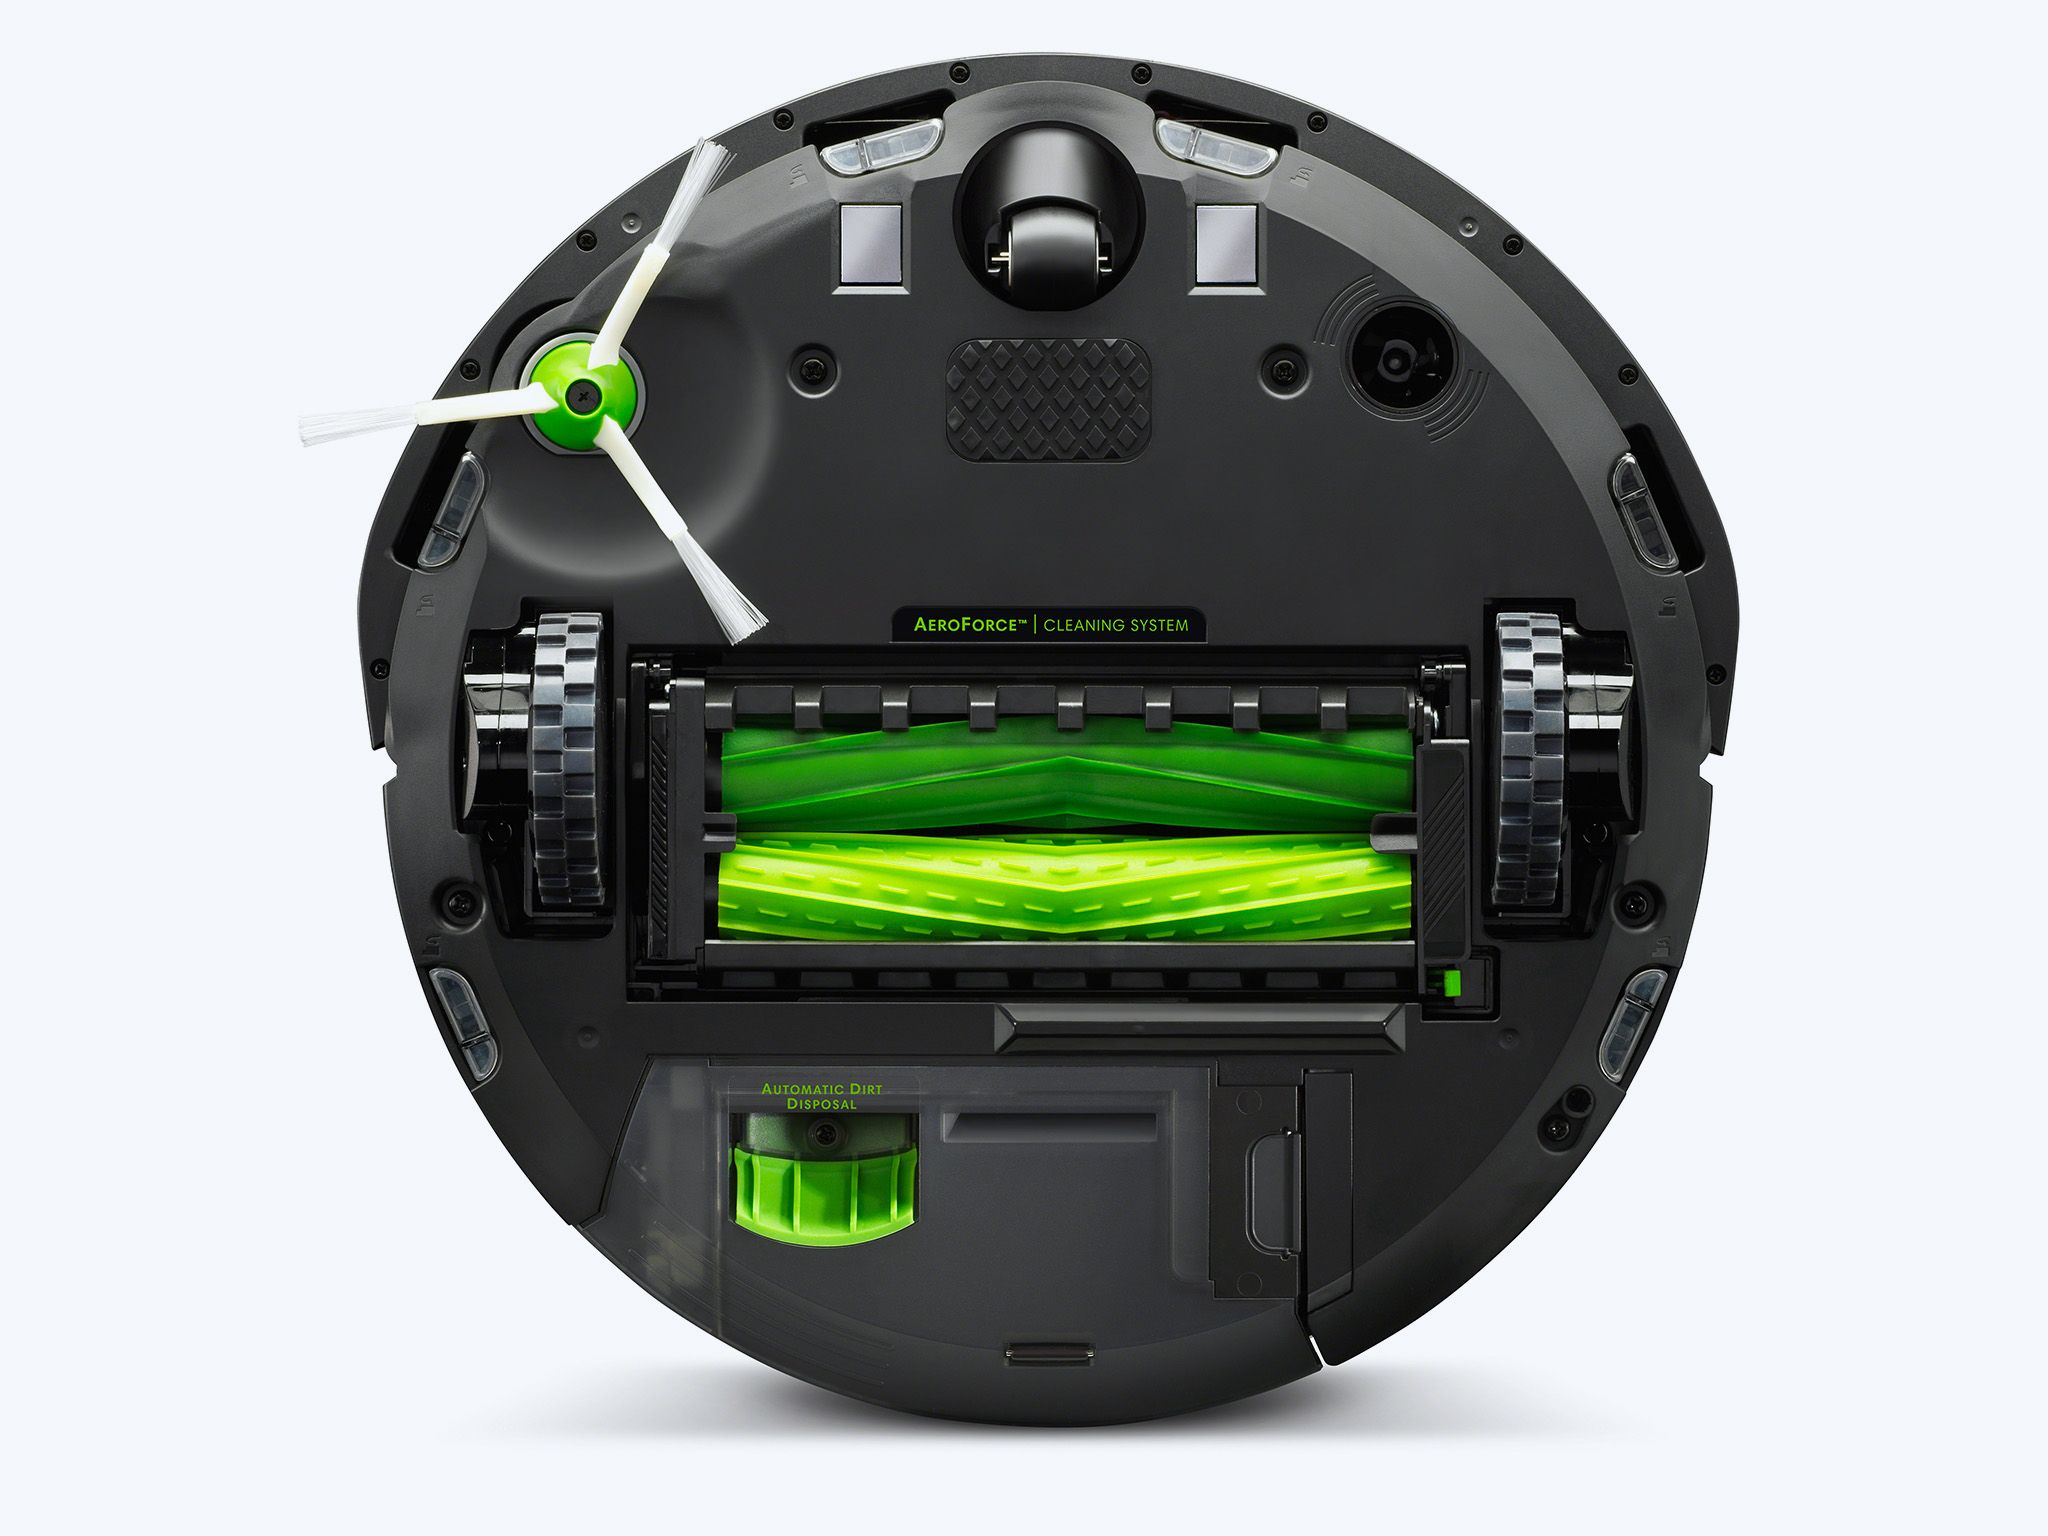 New Roomba i7+ Has Persistent Maps, Selective Room Cleaning, and